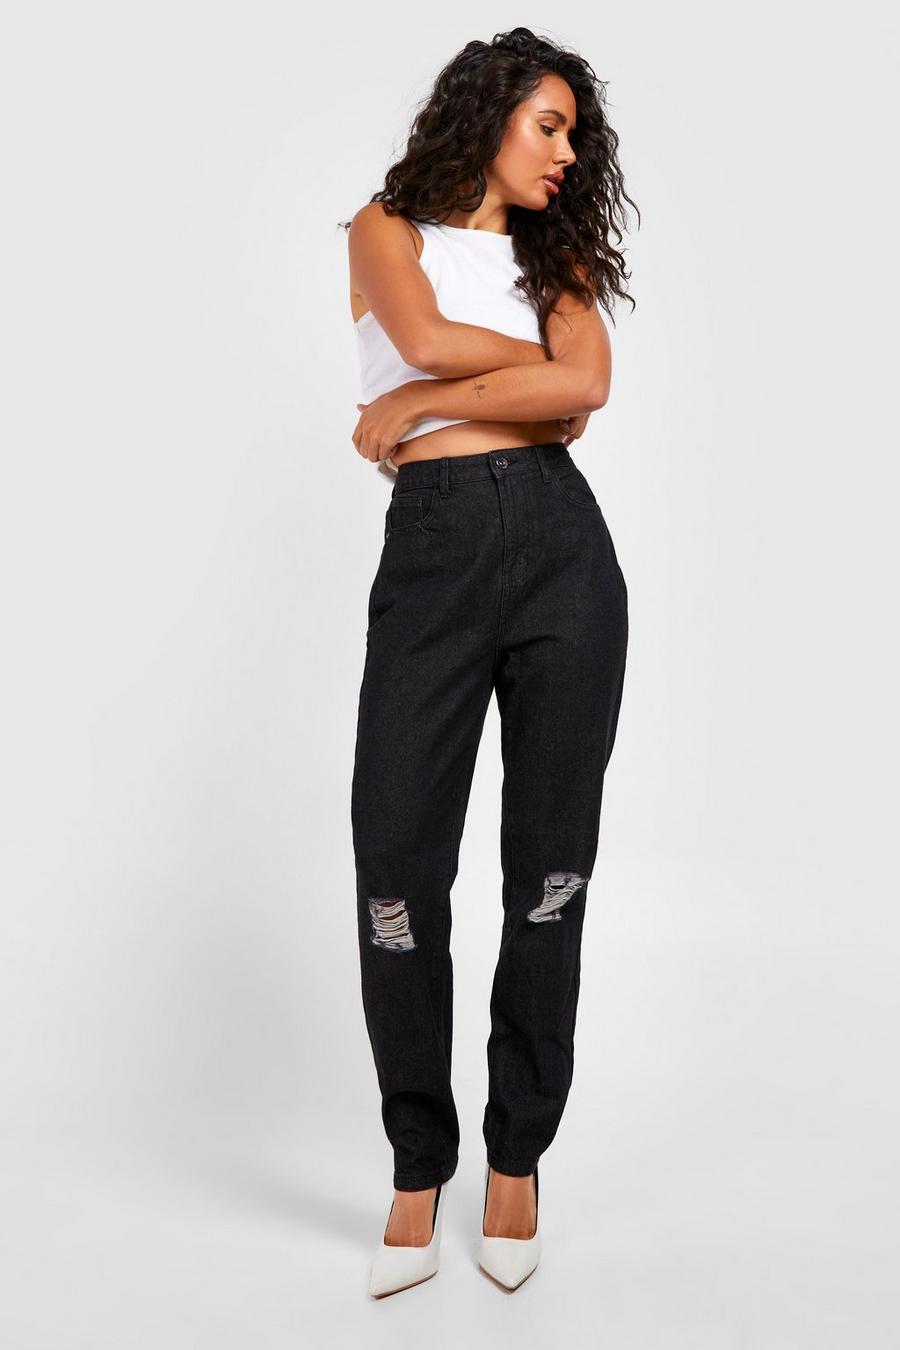 Black Basics High Waisted Ripped Knee Mom Jeans image number 1